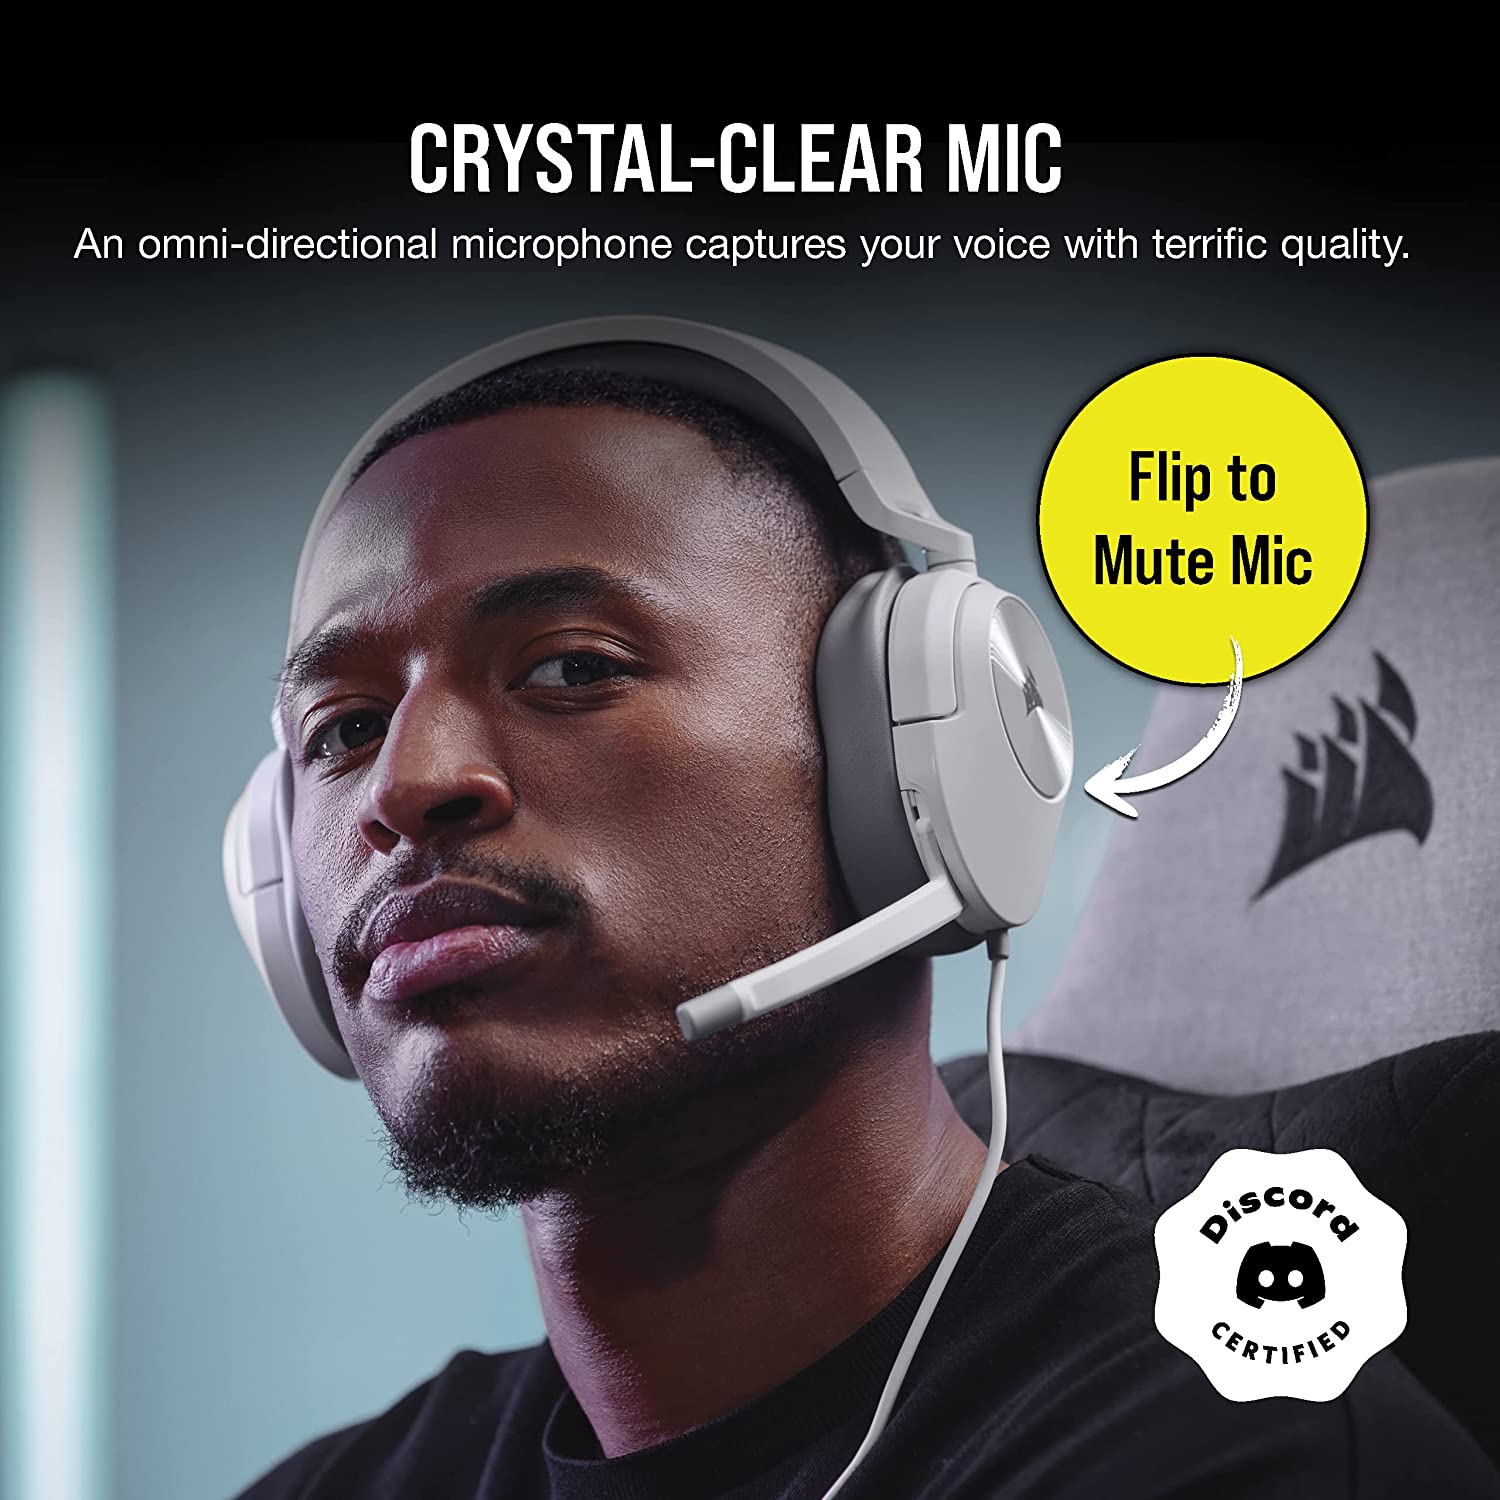 Prime Day Launch: Corsair HS55 Stereo Gaming Headset now available for Prime members